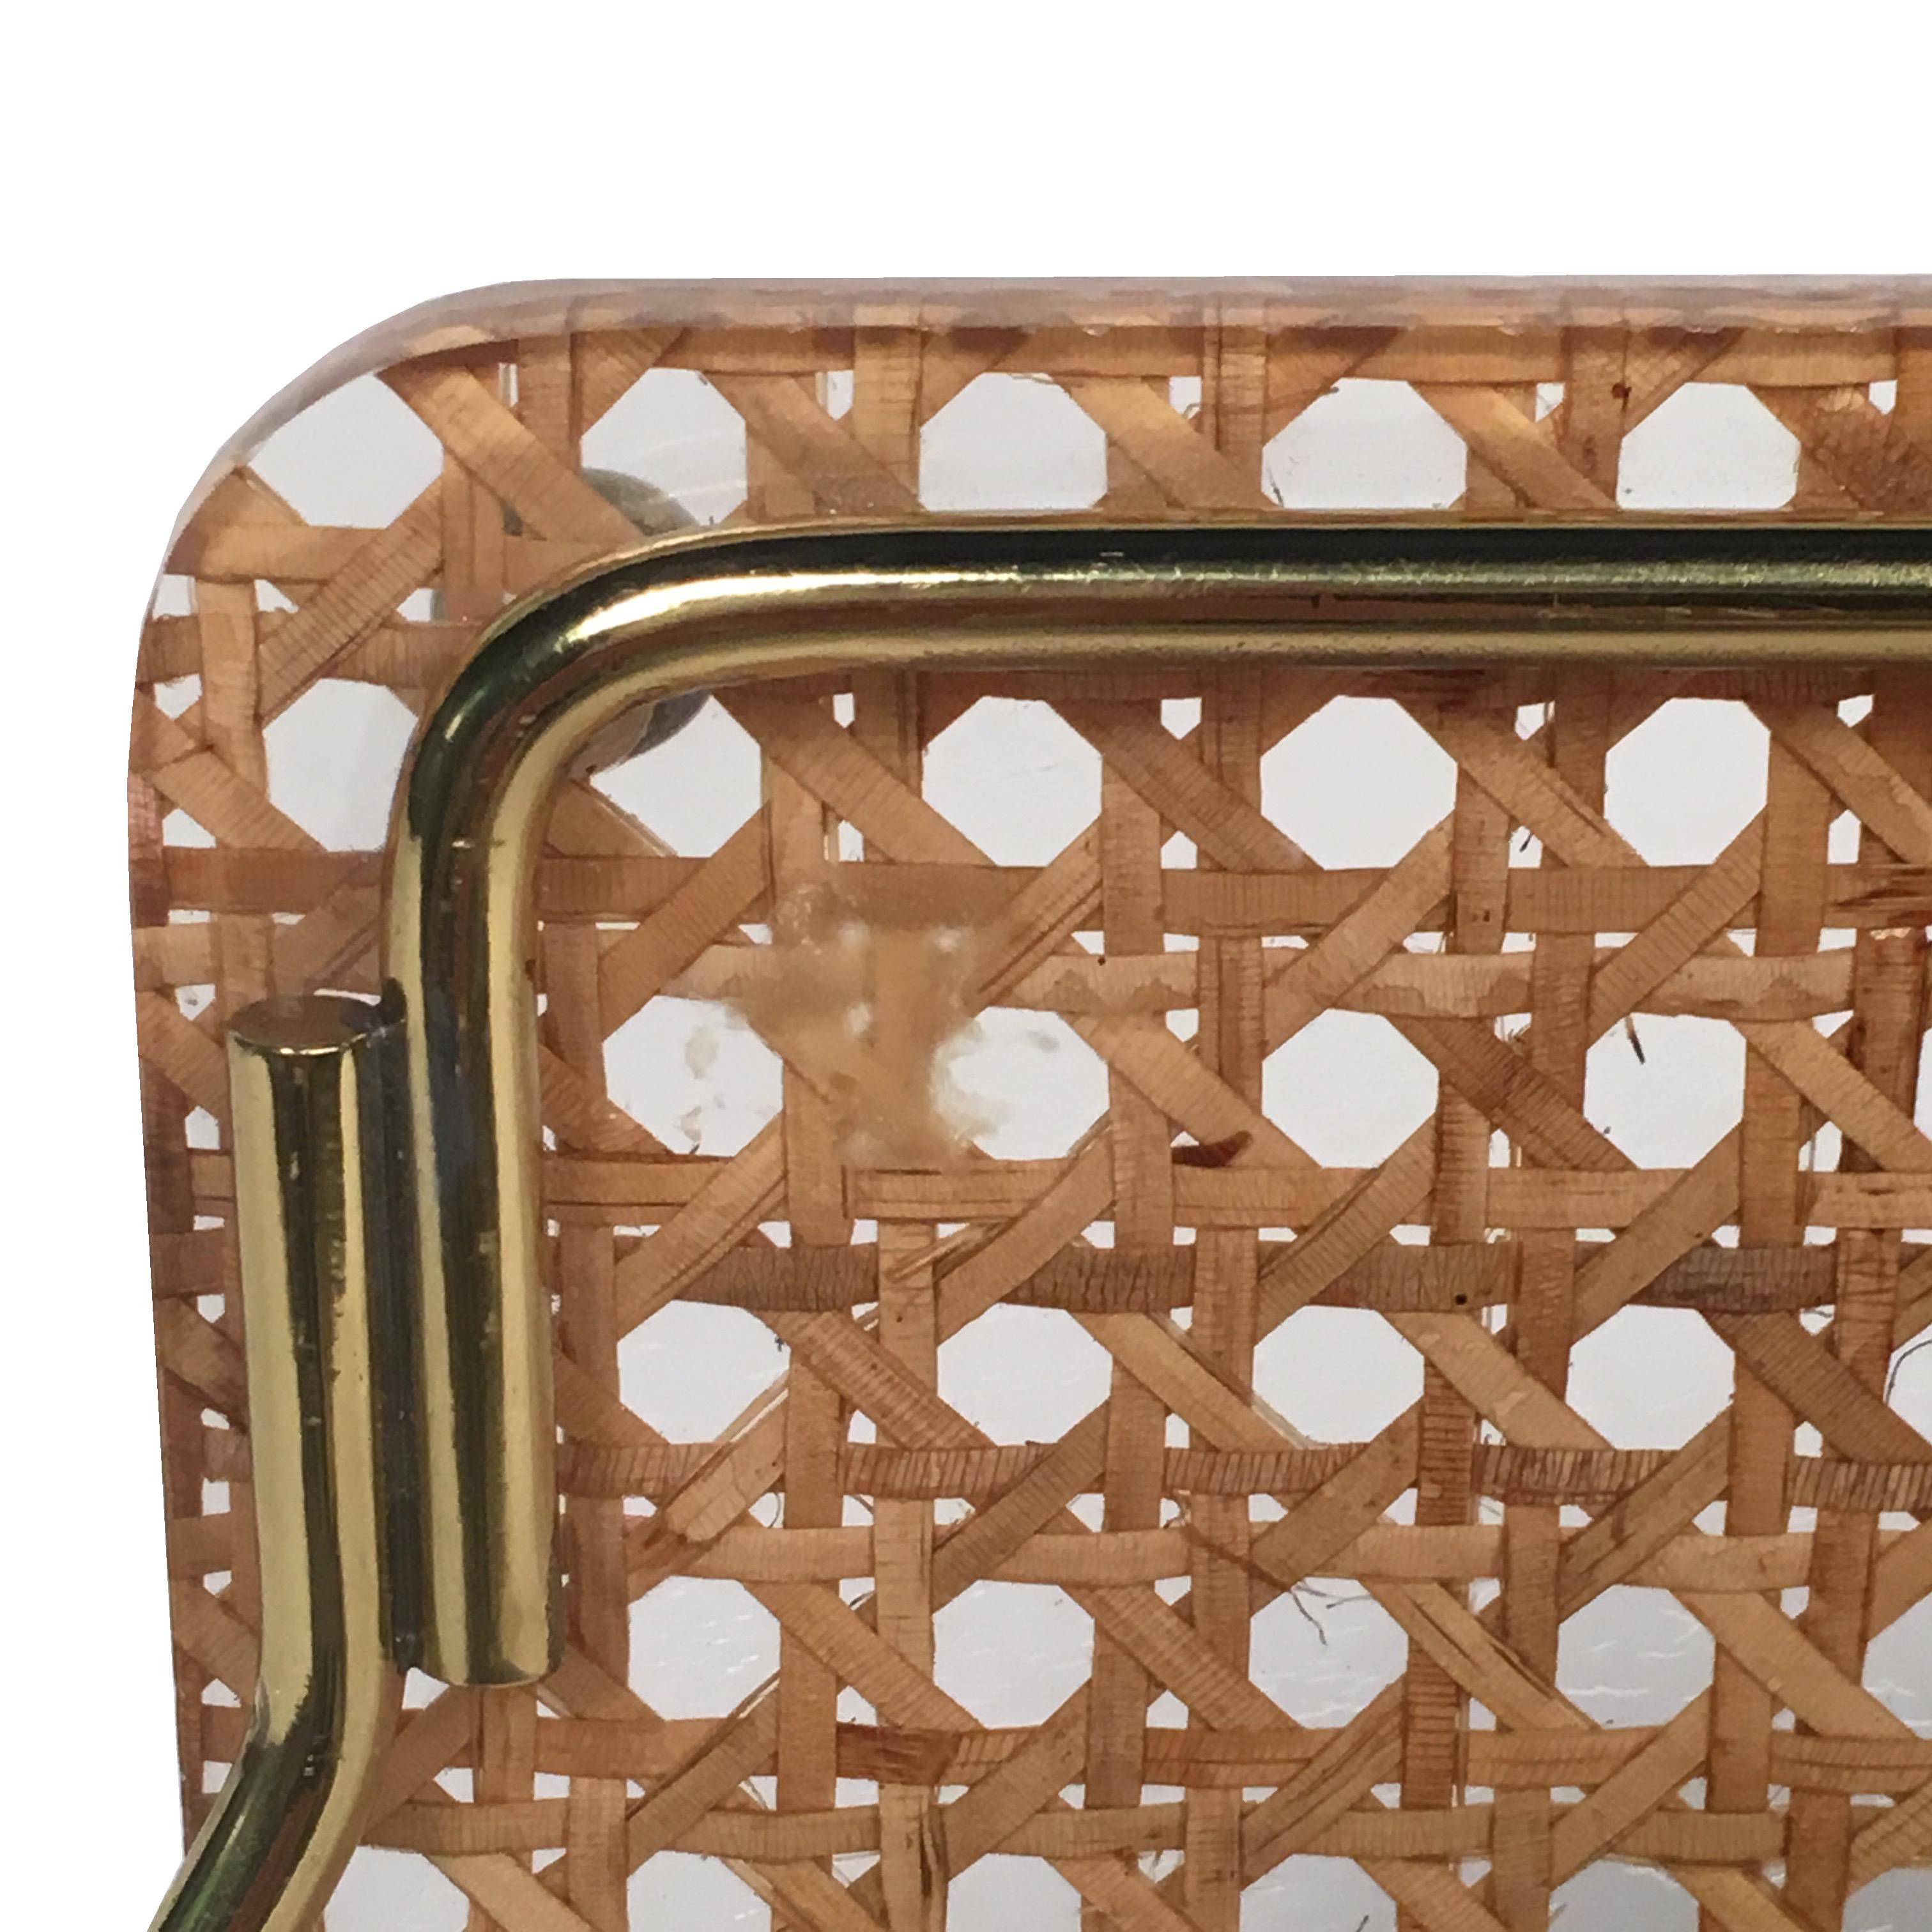 Midcentury stylish butler serving tray made of Lucite and rattan, designed for Christian Dior Home collection in 1970s.
The item has a rectangular shape with gilt brass edges and grips and real rattan cane-work embedded in the crystal clear